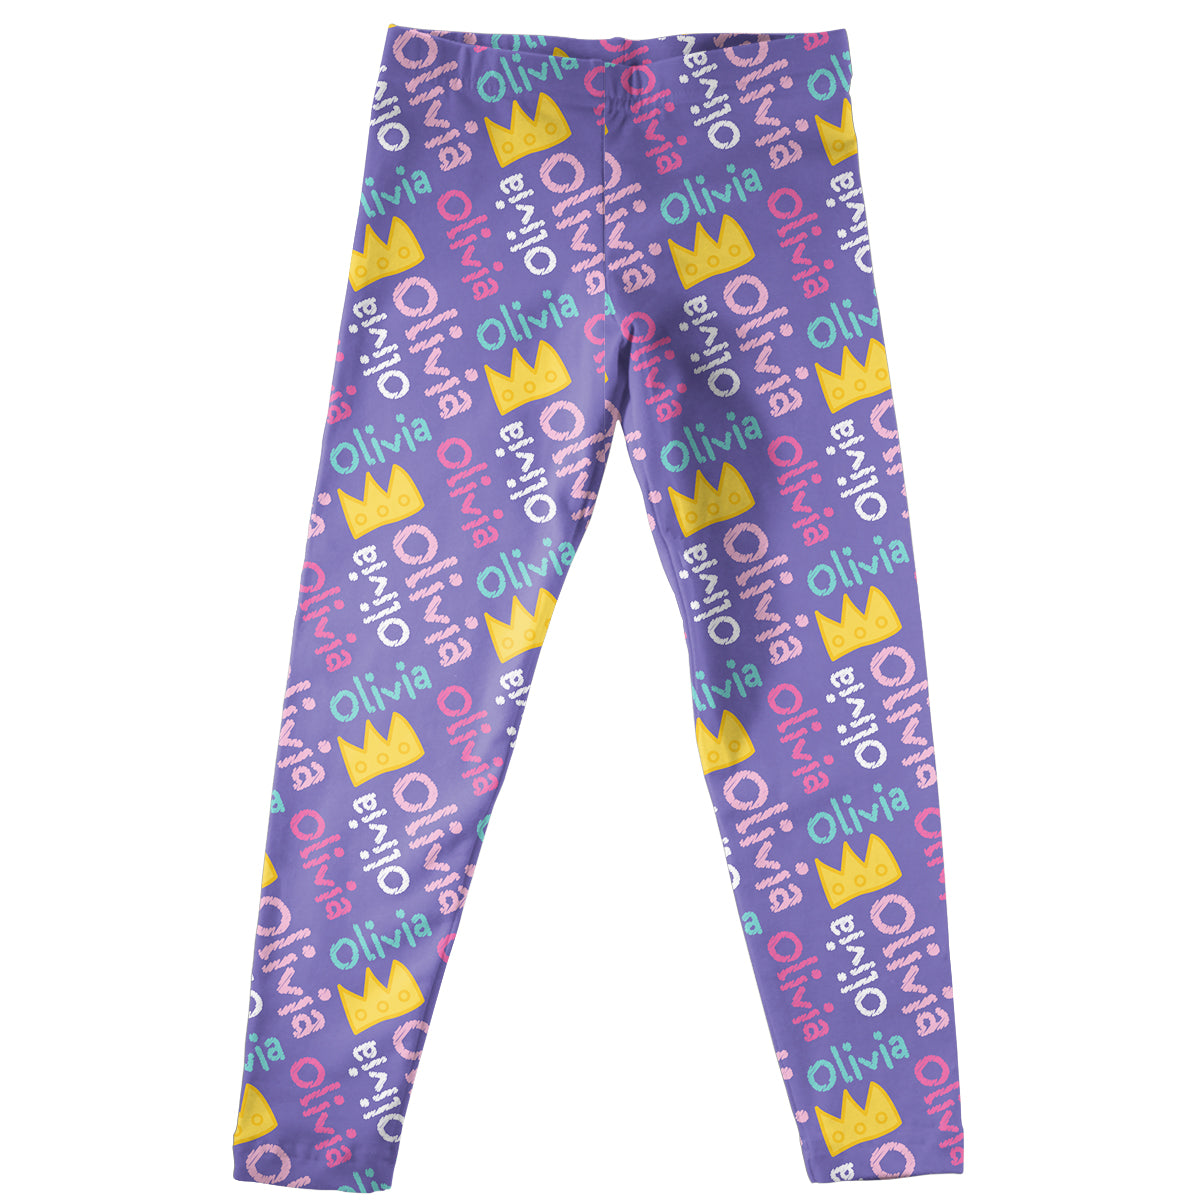 Purple leggings with crowns and name - Wimziy&Co.